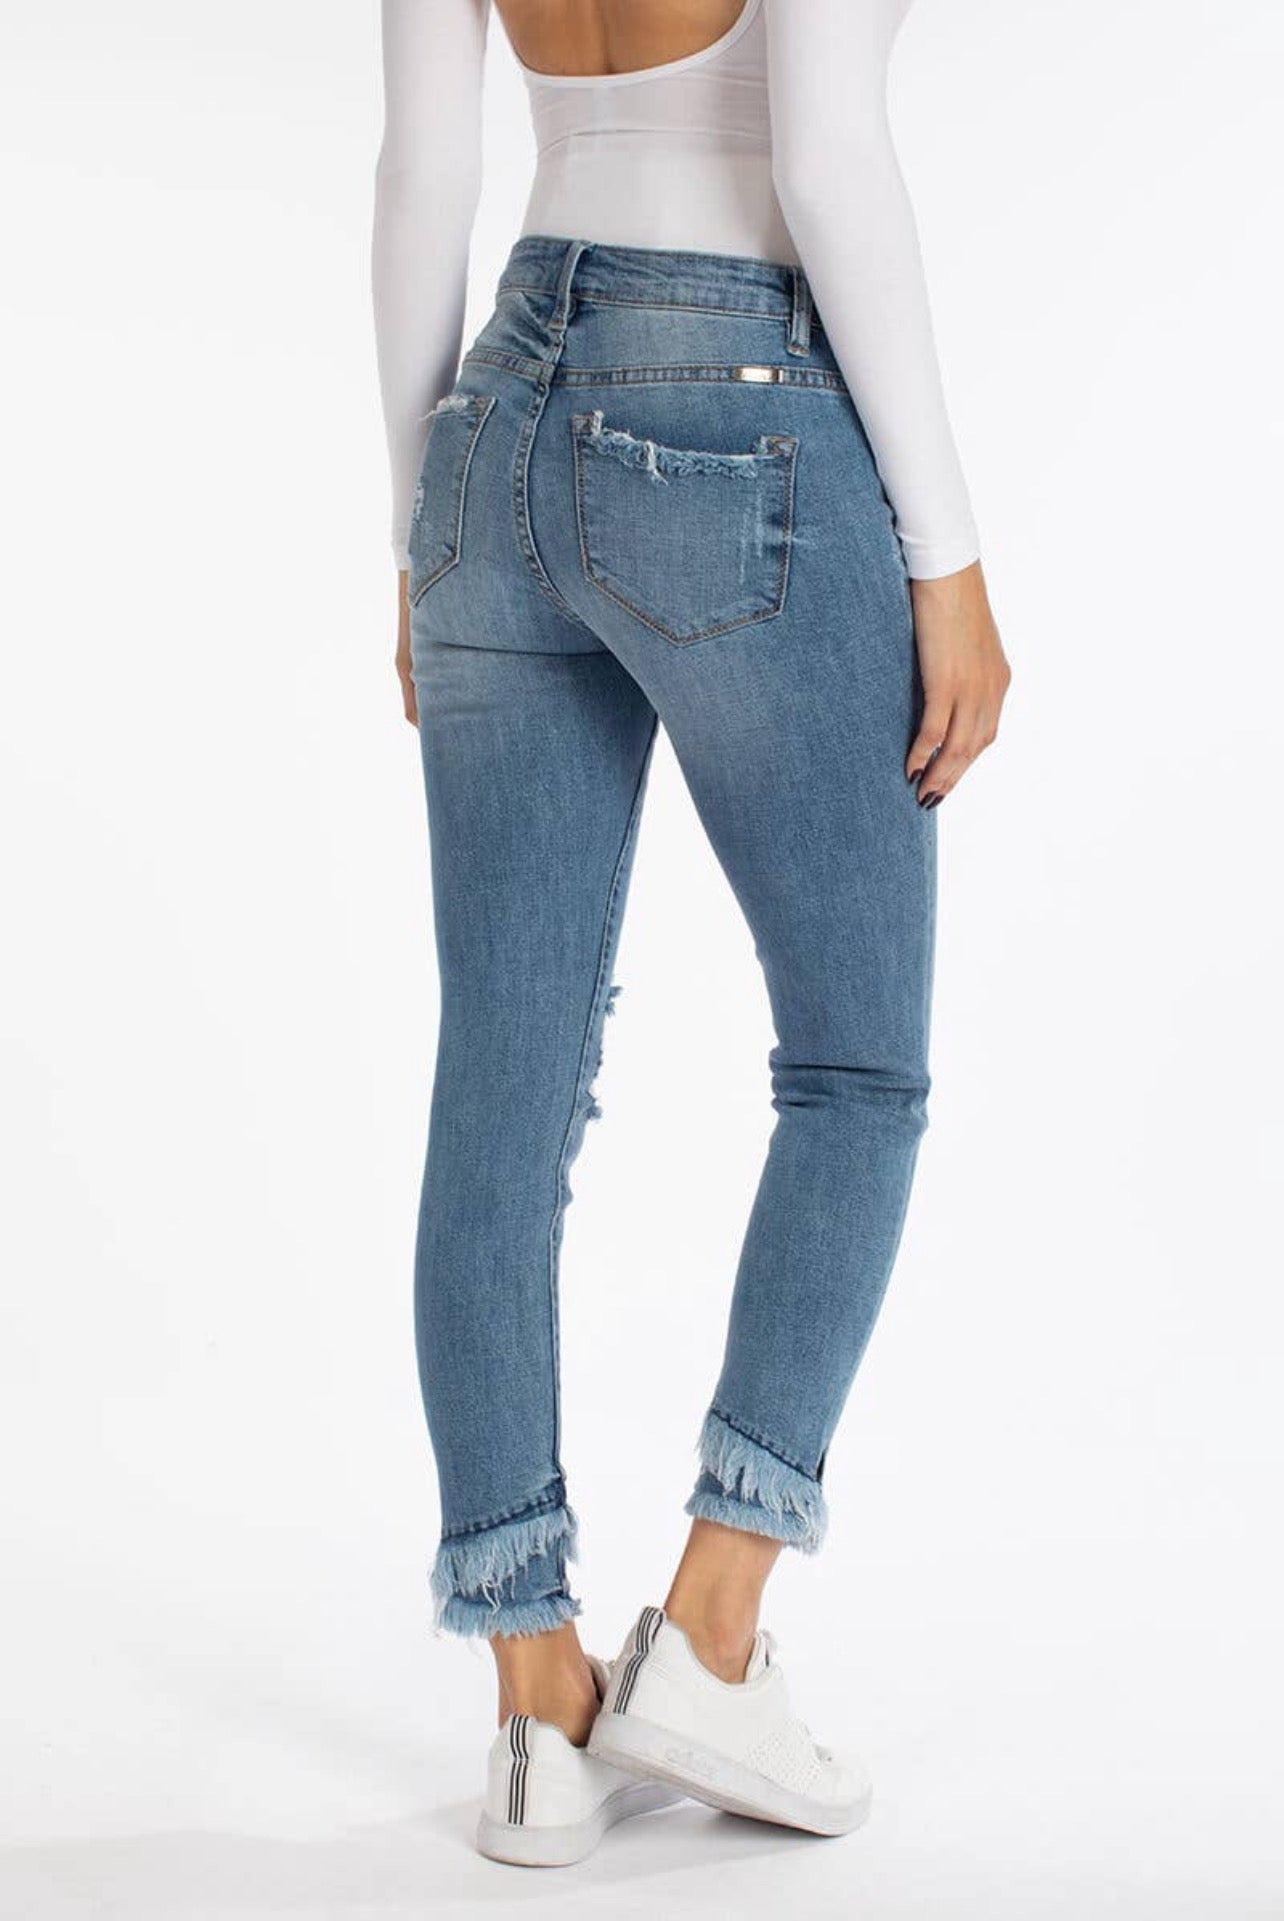 Distressed light washed maternity jeans